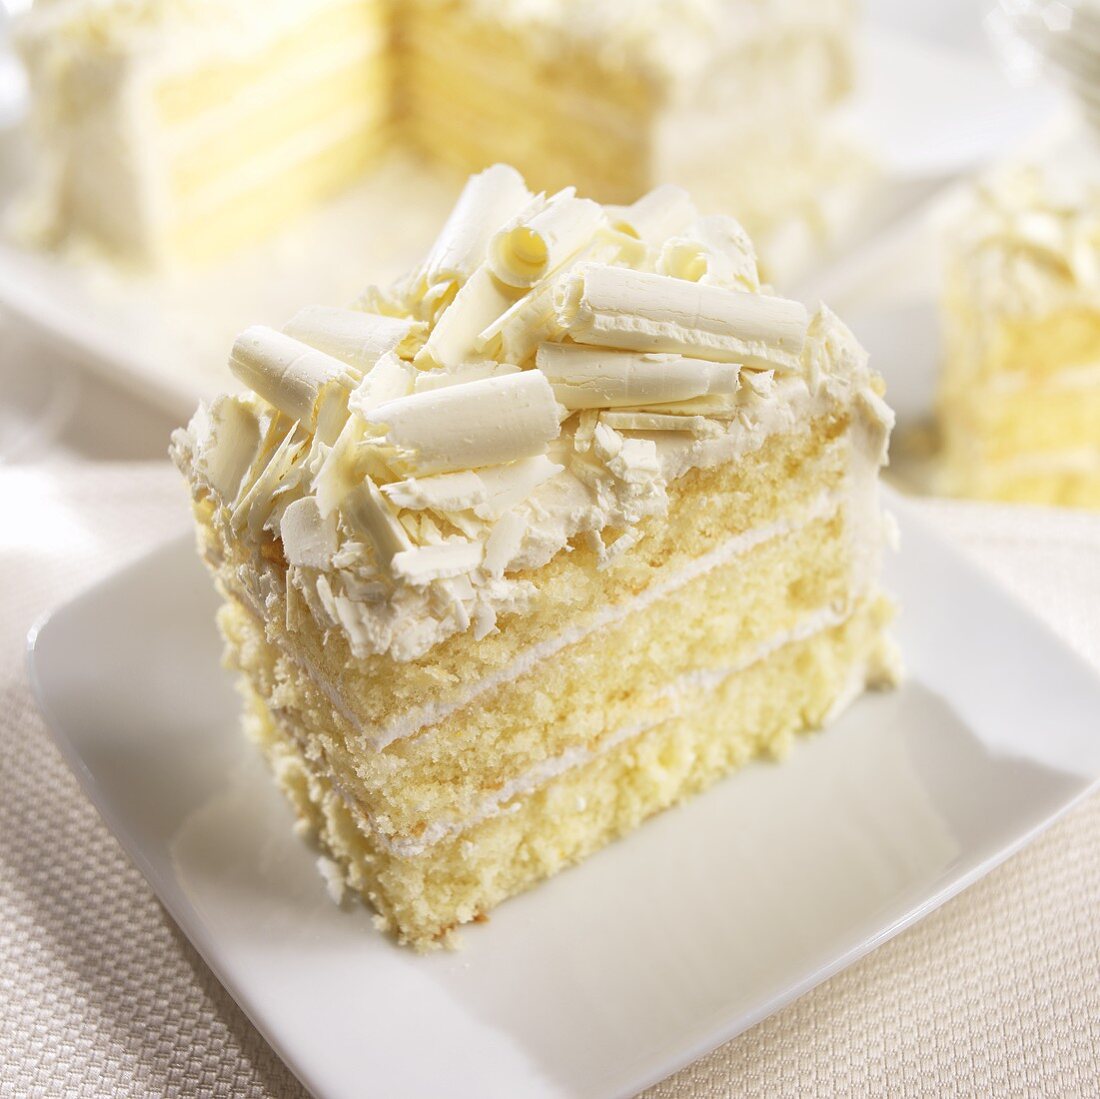 Slice of White Layer Cake with White Chocolate Curls